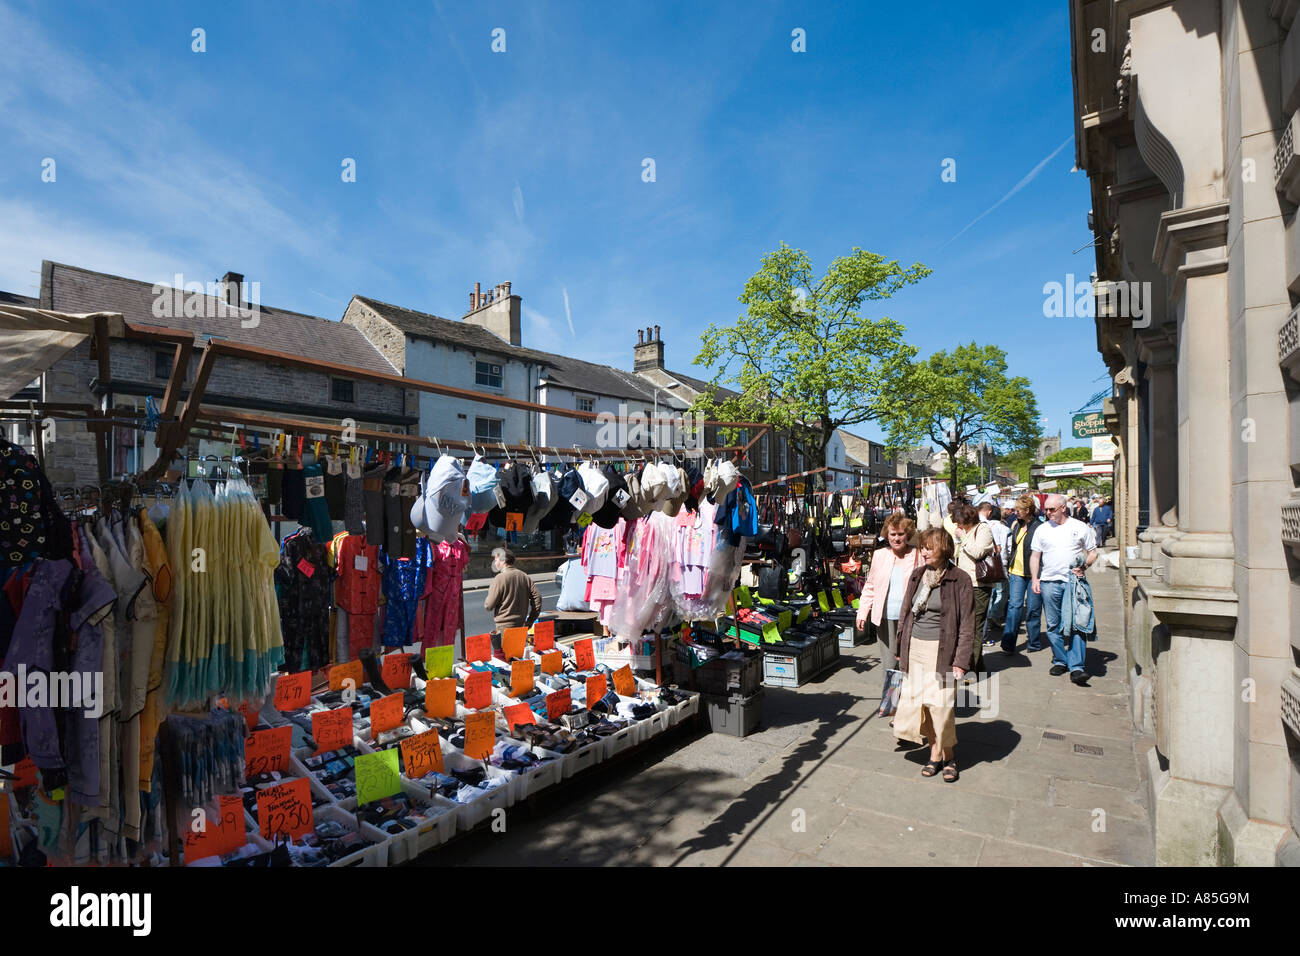 Monday Market in Town Centre, Skipton, Yorkshire Dales National Park, North Yorkshire, England, UK Stock Photo